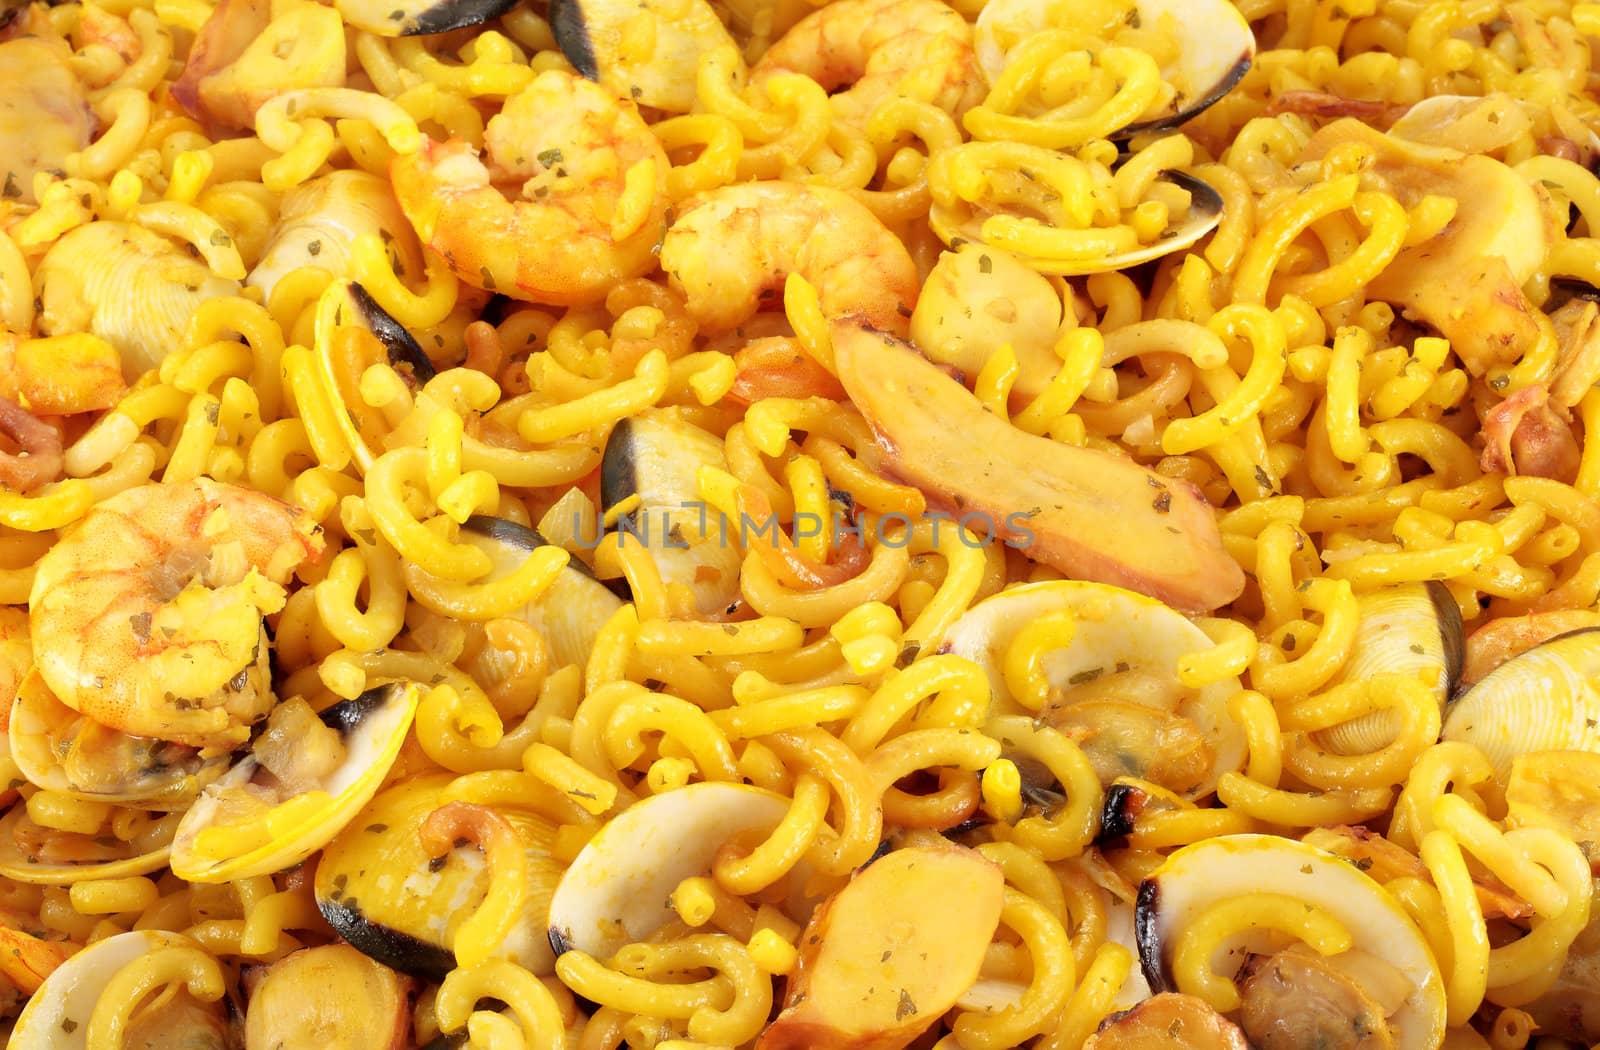 detail of typical Spanish food noodles with prawns clams squid and prawns